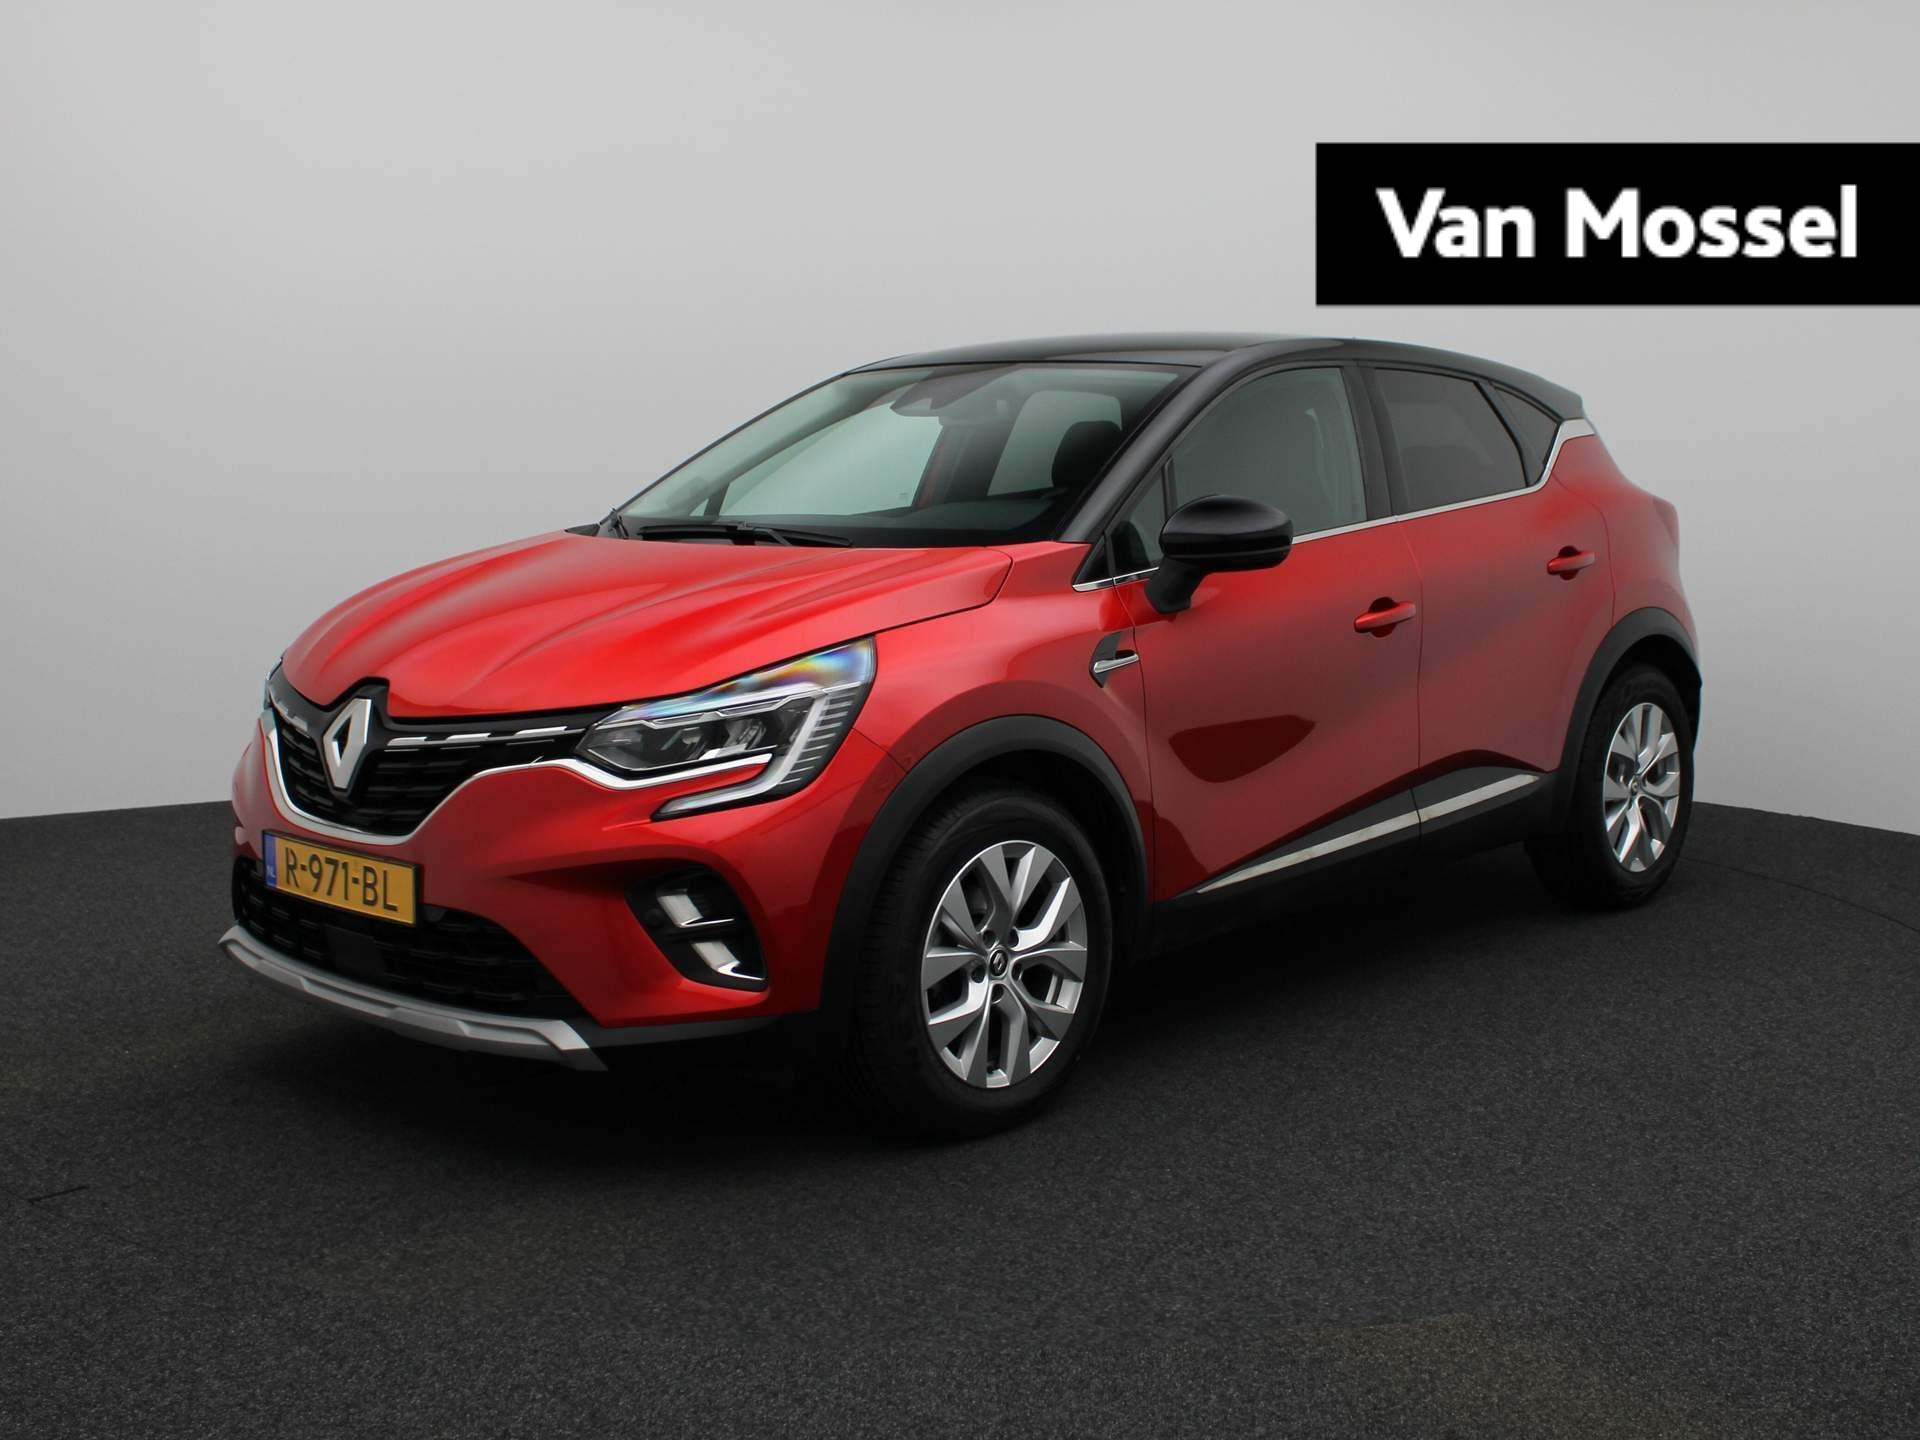 Renault Captur 1.0 TCe 90 Intens | Pack Easy Link | Pack Parking | Keyless | 17" LMV 'Bahamas' | LED Pure Vision | Climate Control | Apple Carplay & Android Auto | Privacy Glass